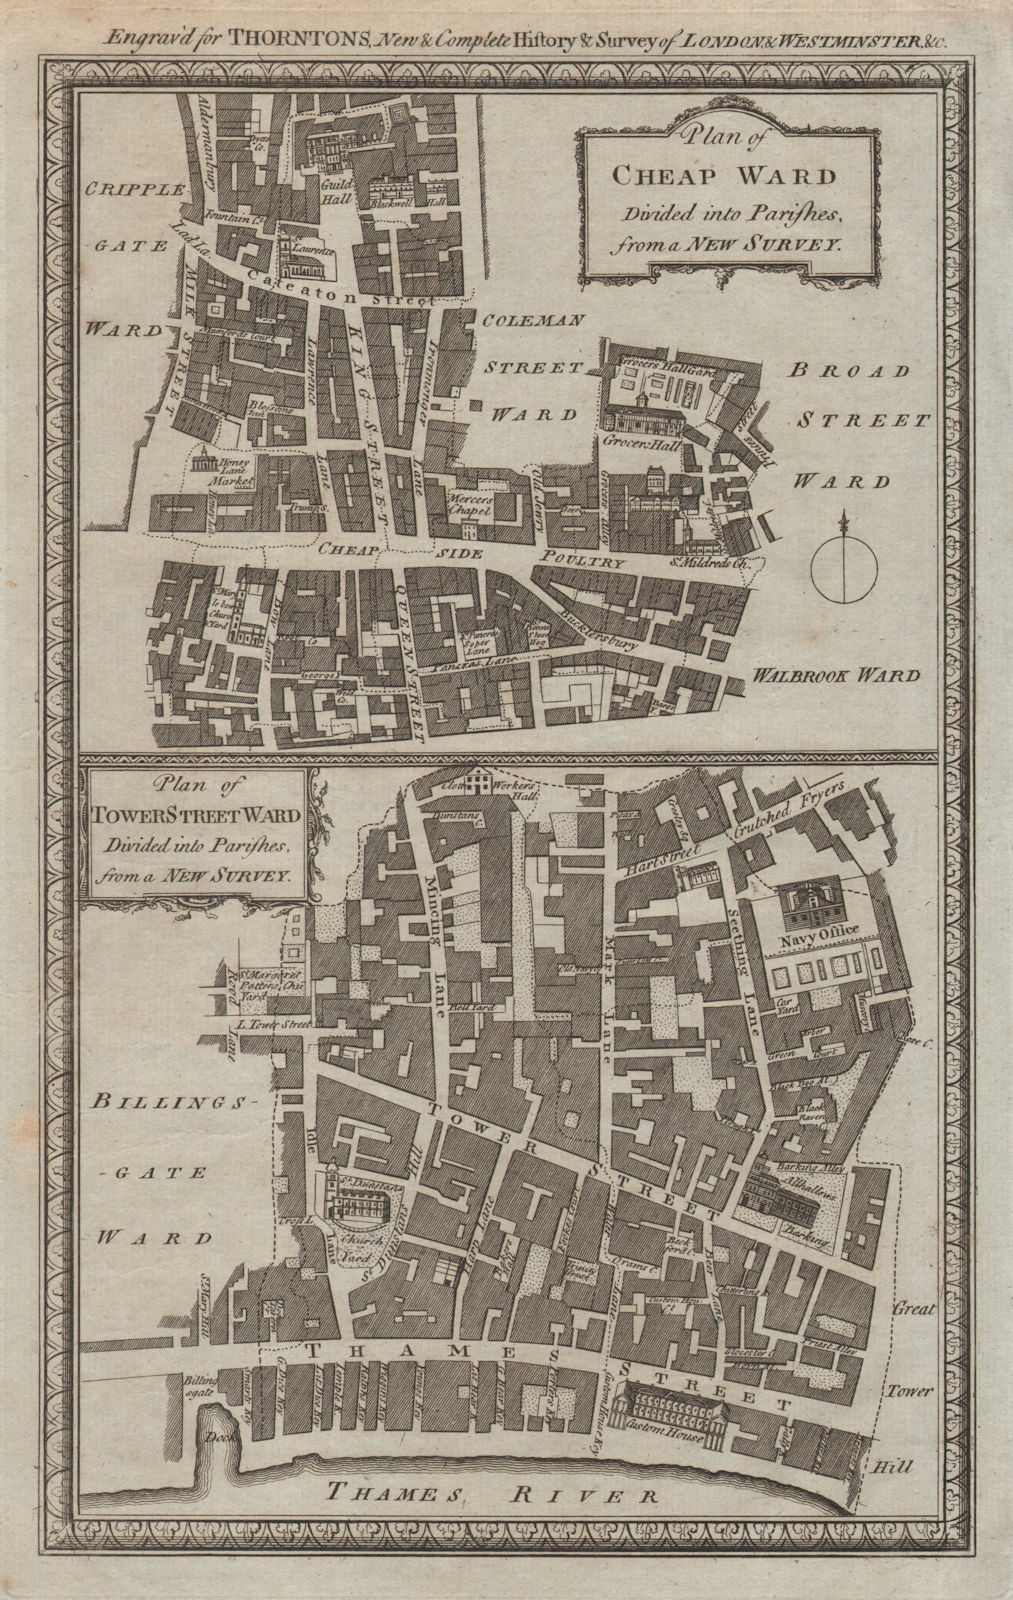 Associate Product Cheap & Tower Street Wards. City of London. THORNTON 1784 old antique map